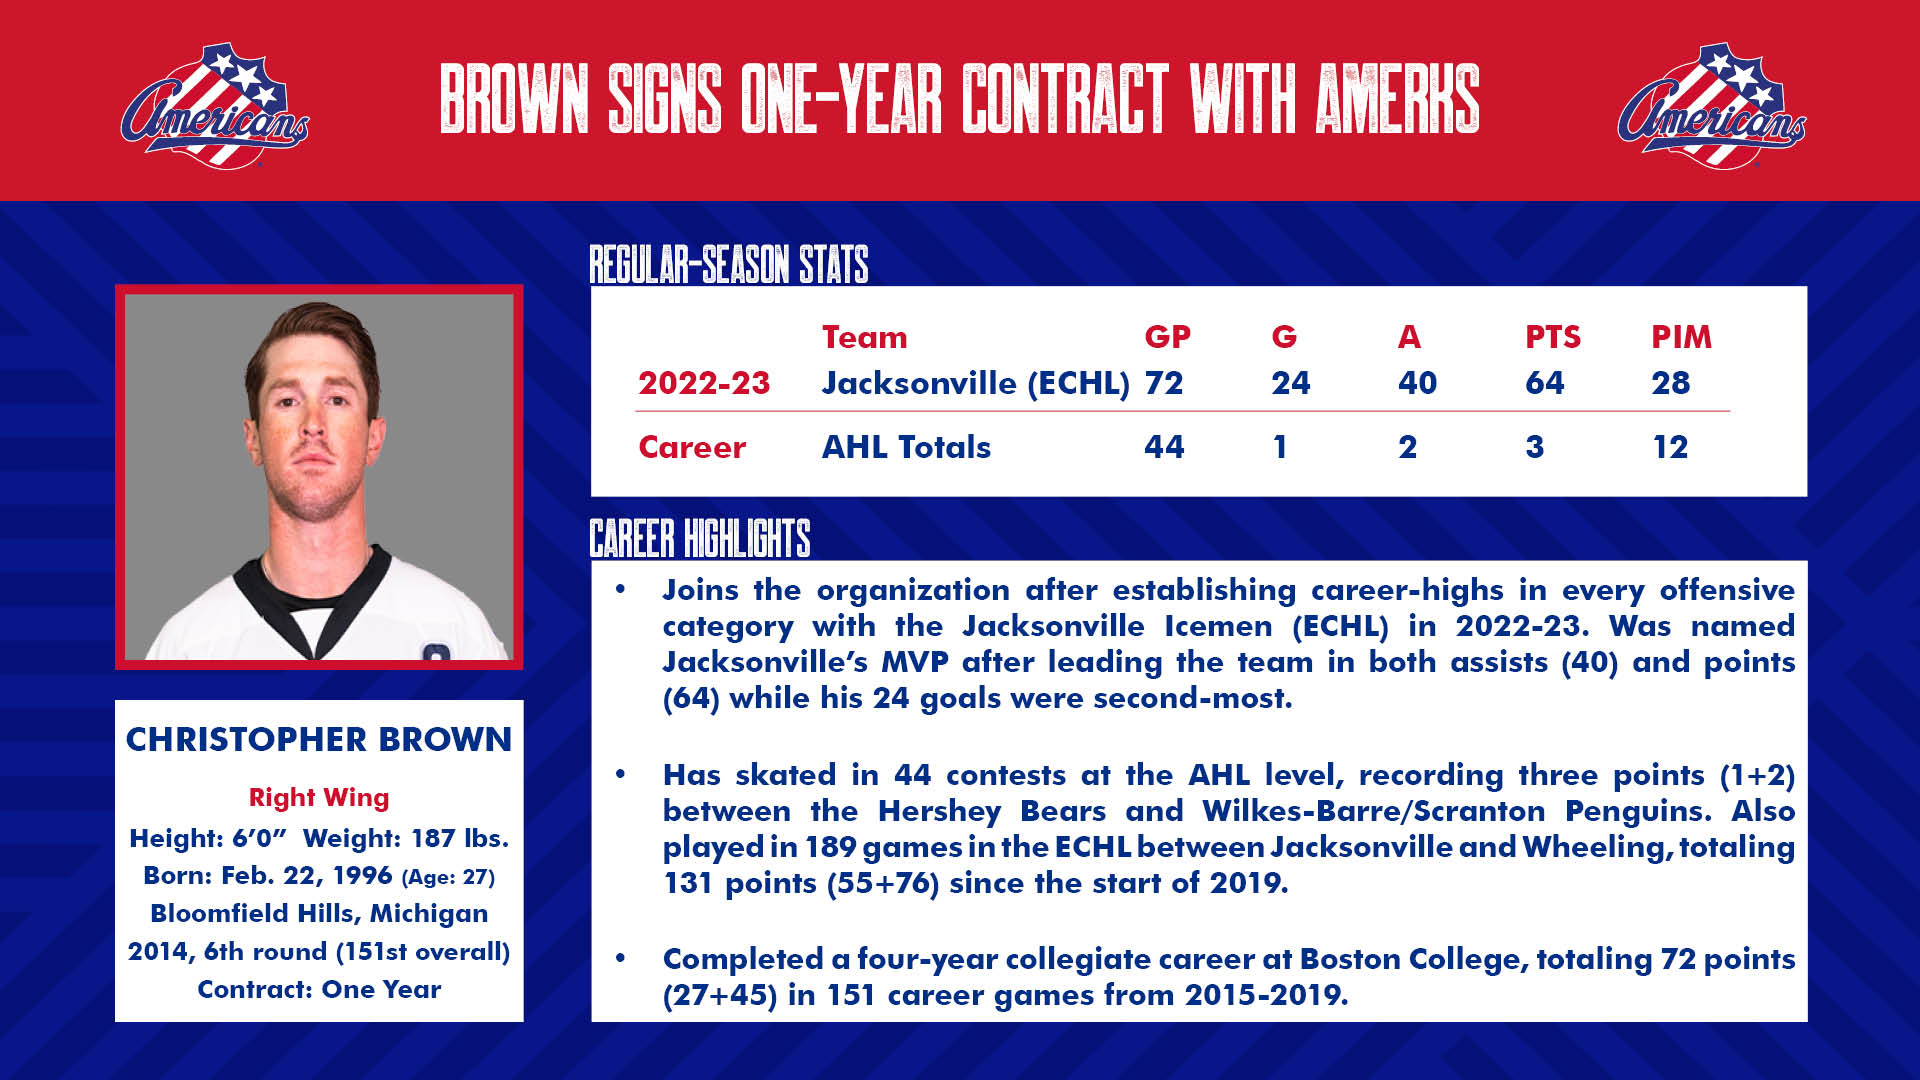 Brown signs a One-Year Contract.jpg